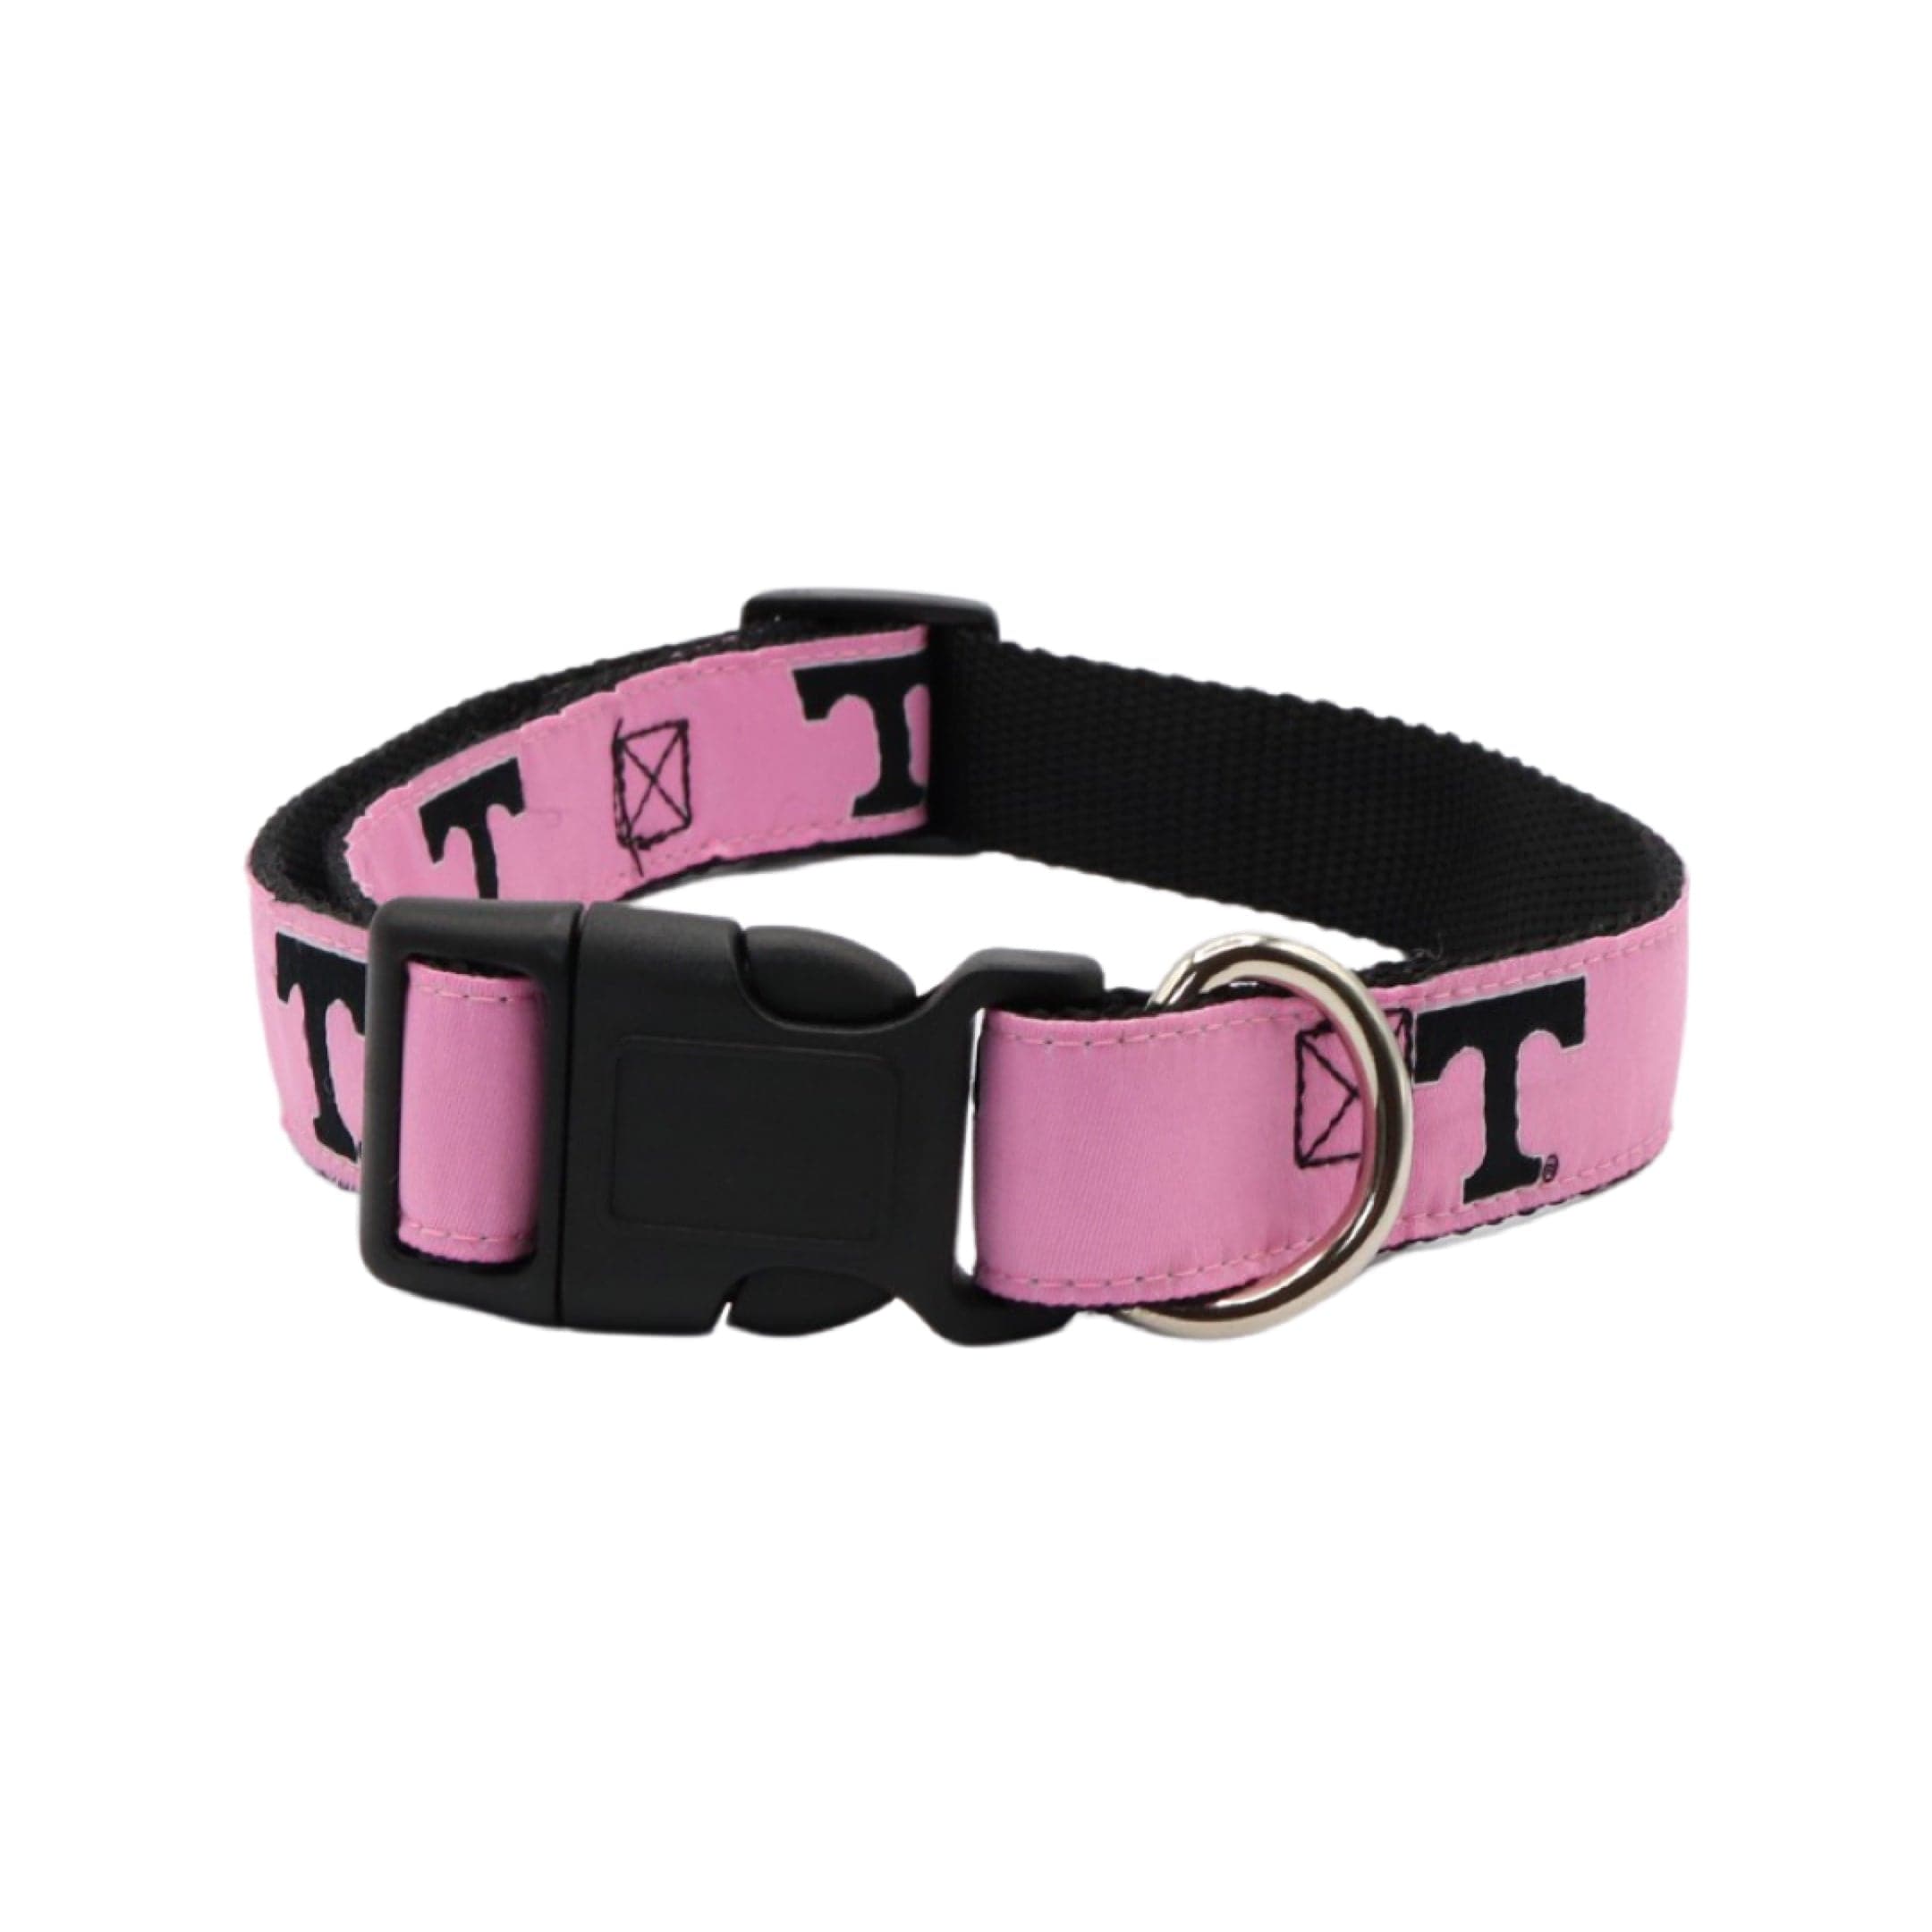 UNIVERSITY OF TENNESSEE PINK DOG COLLAR